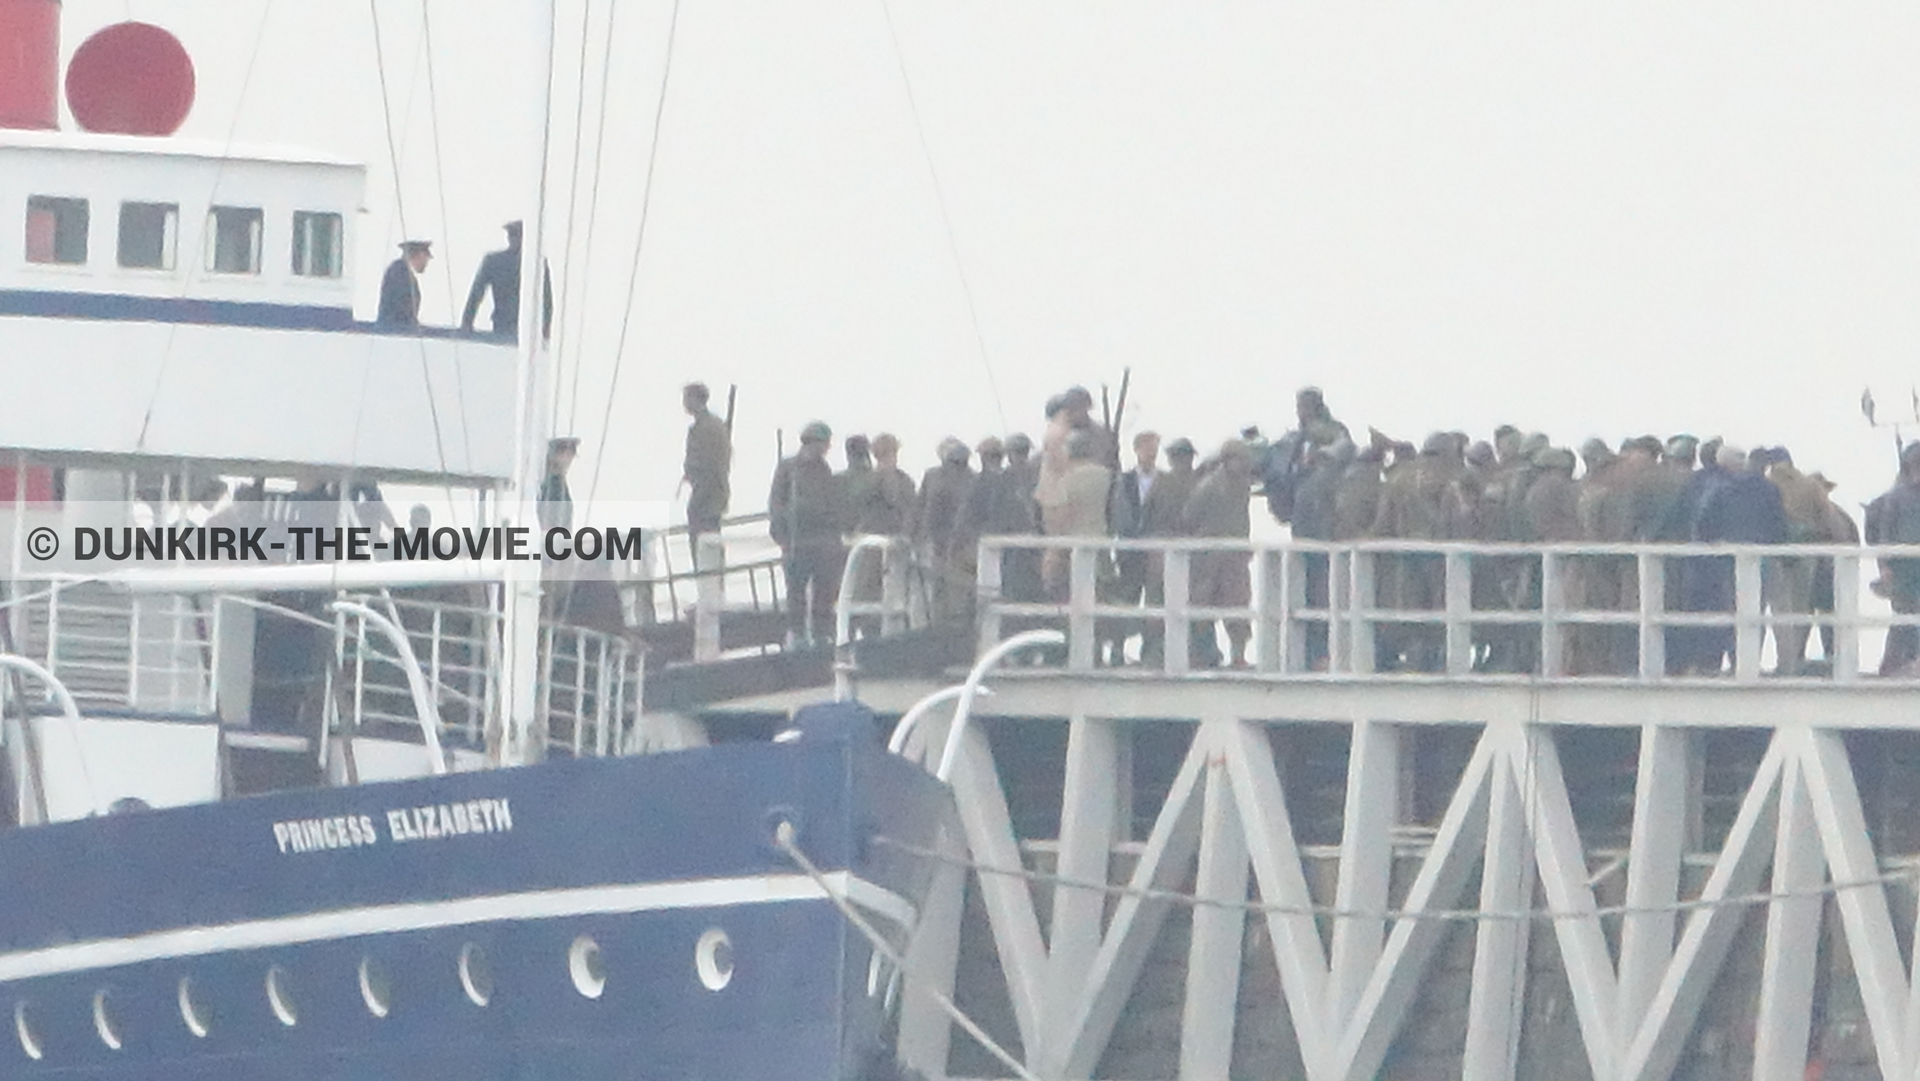 Picture with grey sky, supernumeraries, EST pier, Princess Elizabeth,  from behind the scene of the Dunkirk movie by Nolan